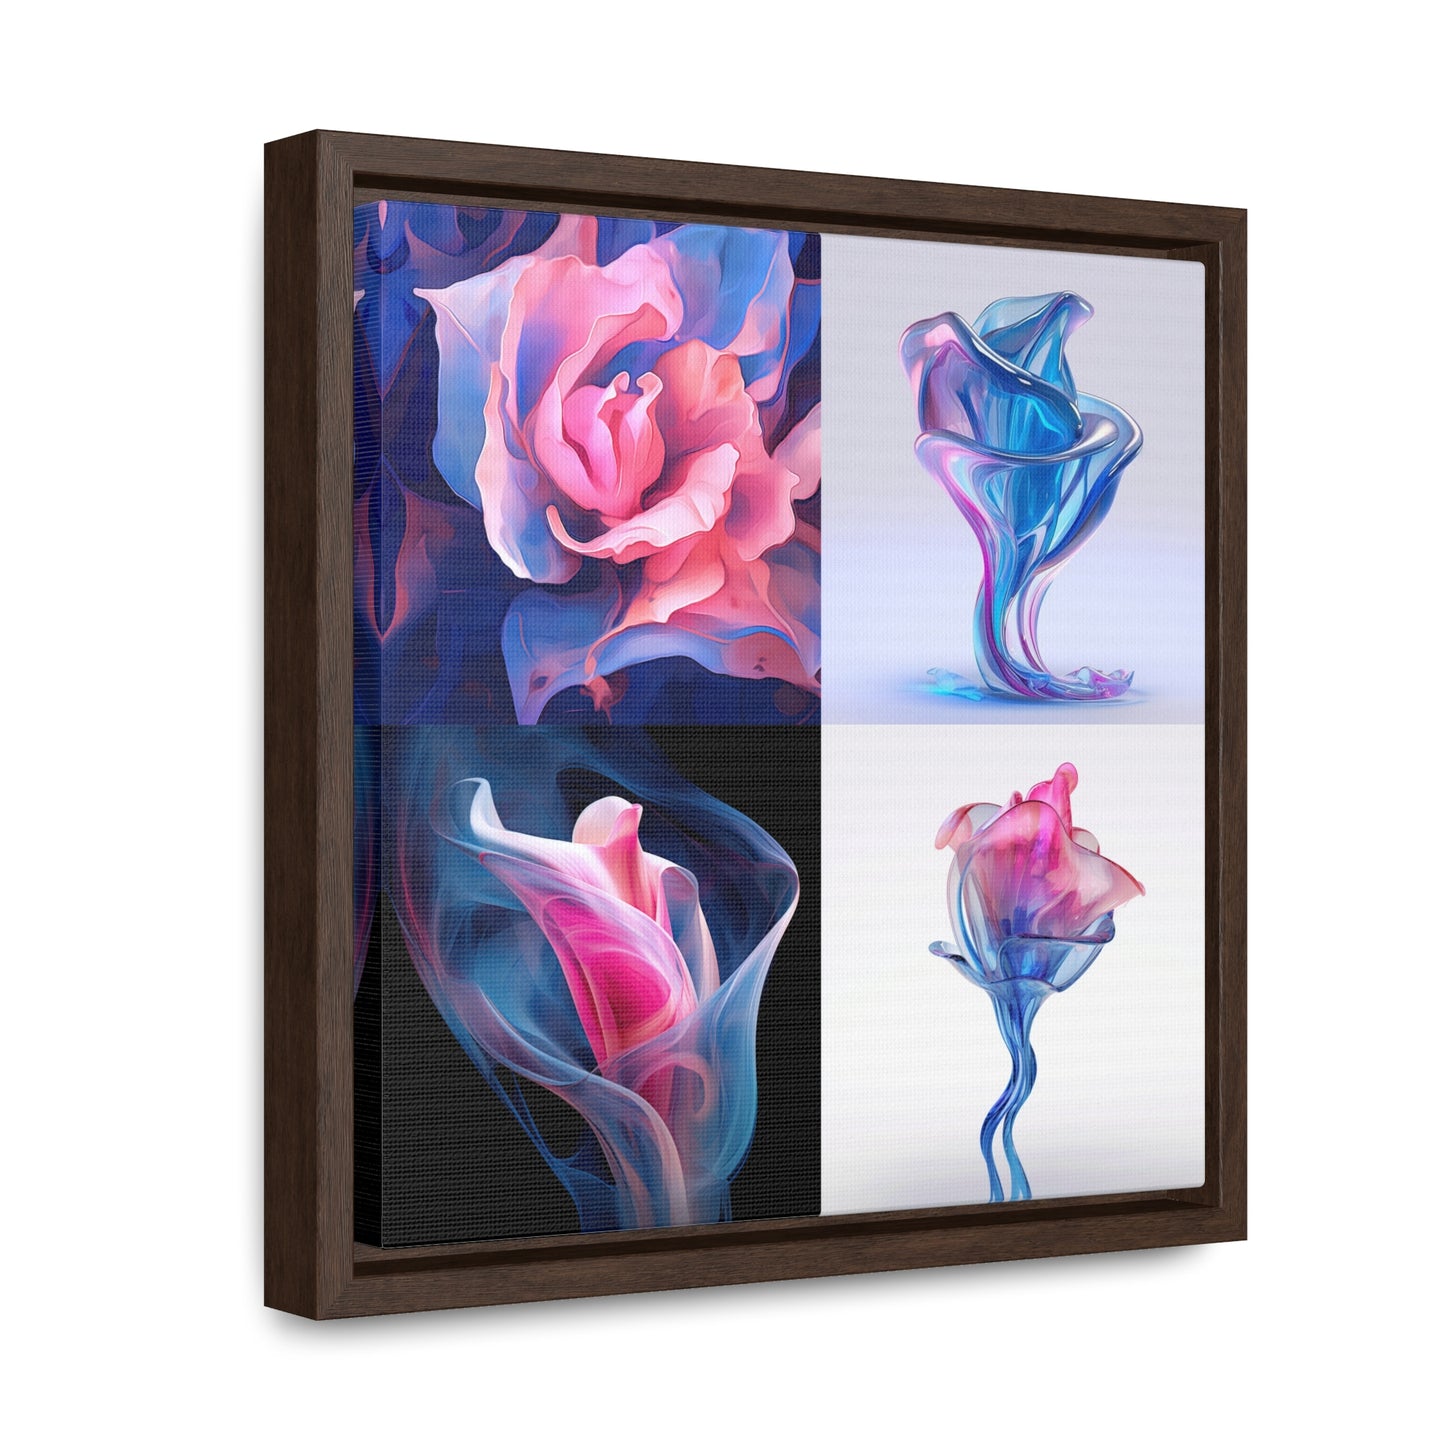 Gallery Canvas Wraps, Square Frame Pink & Blue Tulip Rose 5